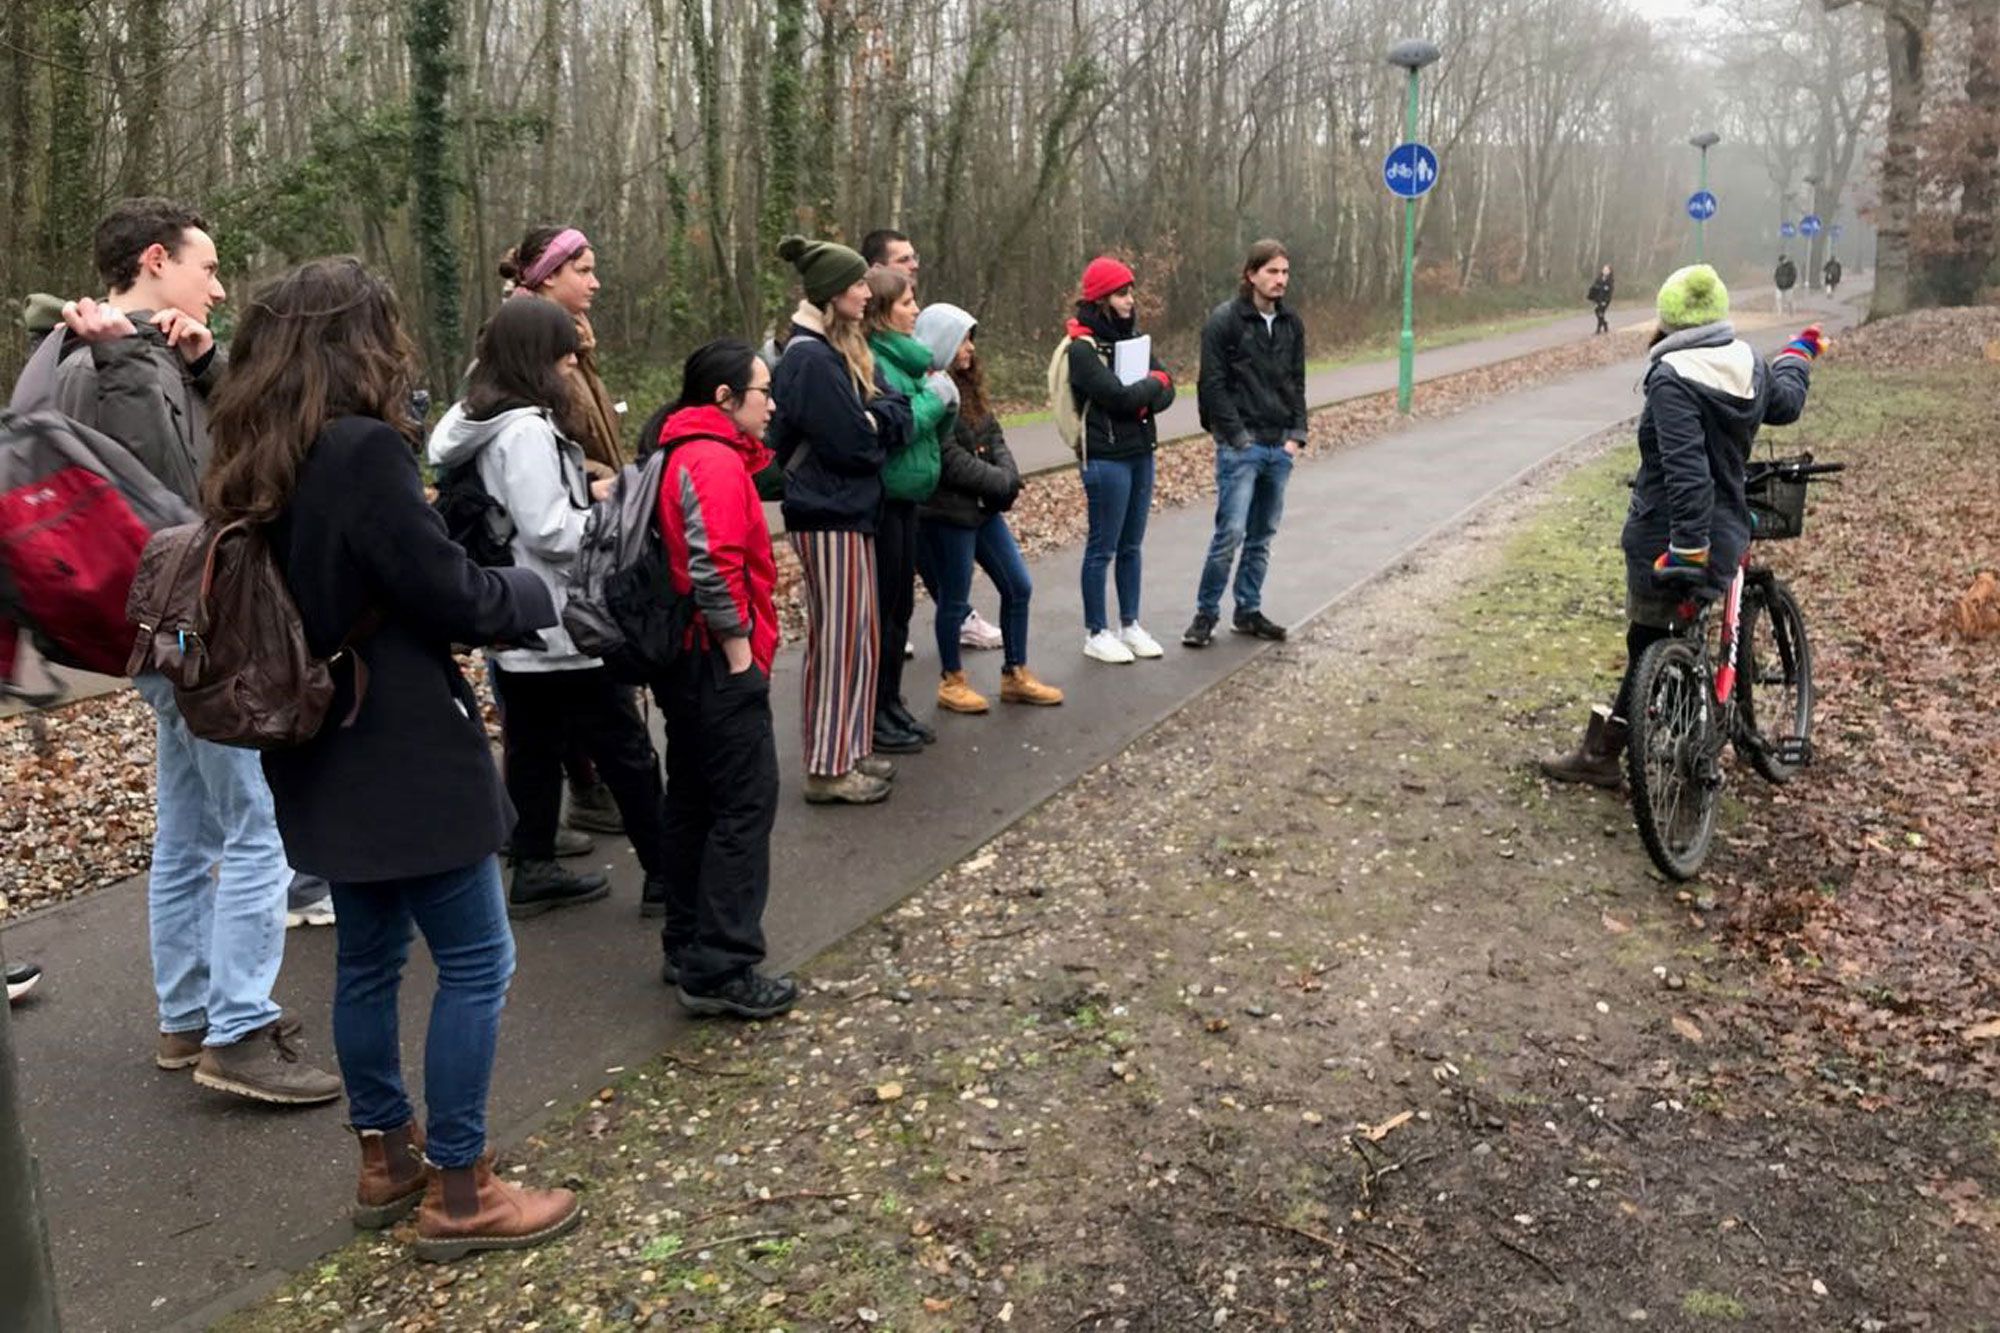 Students with Catherine Morris (University of Kent Sustainability Team) discussing issues around the management of the University’s open spaces, which includes roughly 300 acres of campus, woodland and greenspace then another (roughly) 300 acres of farmland to the north.